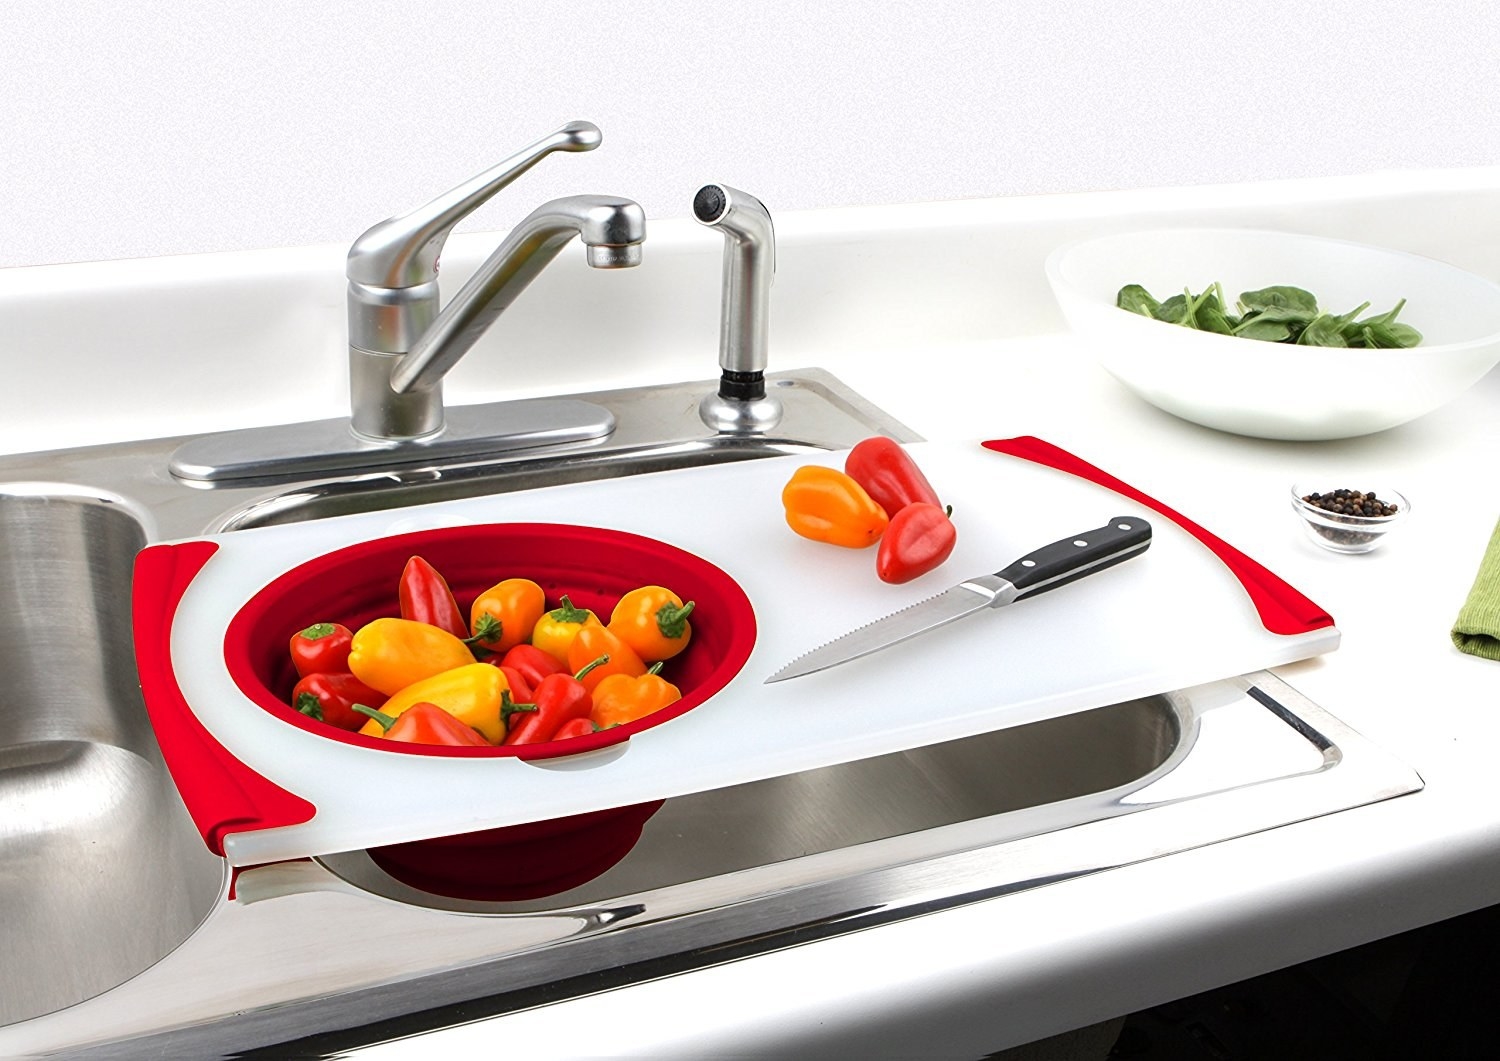 The cutting board and strainer with peppers over the sink